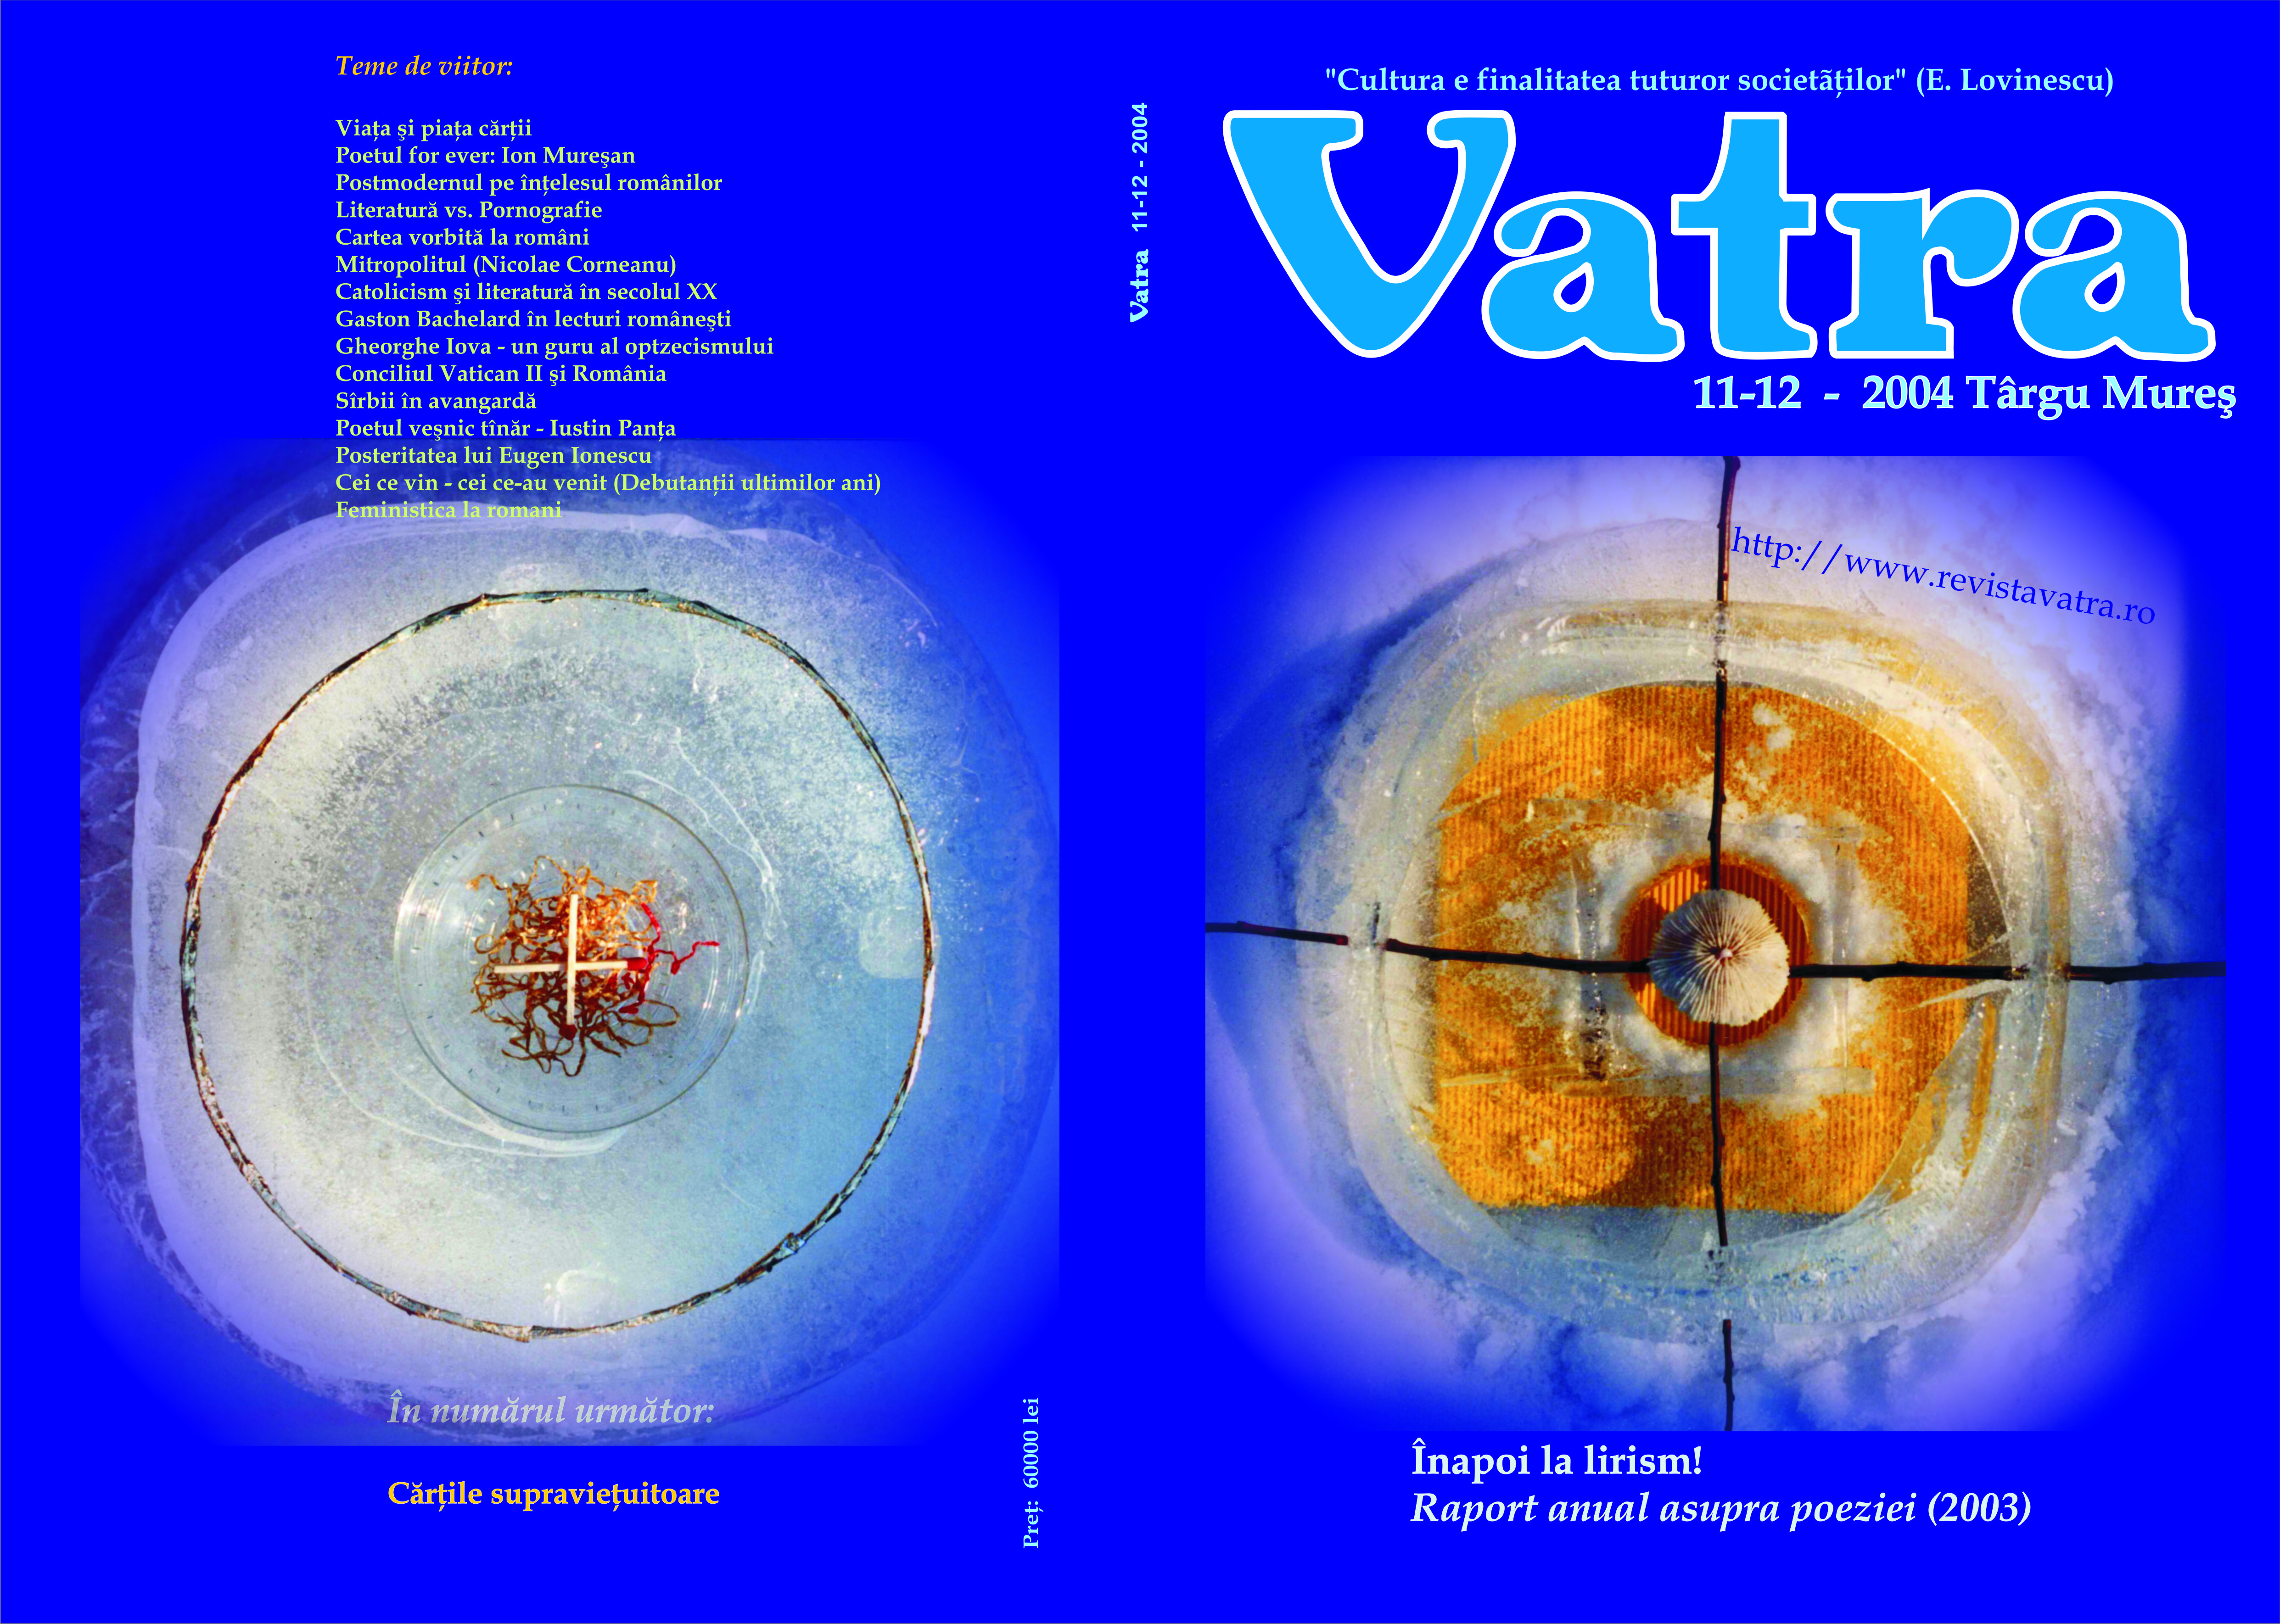 The letter from Olanesti Cover Image